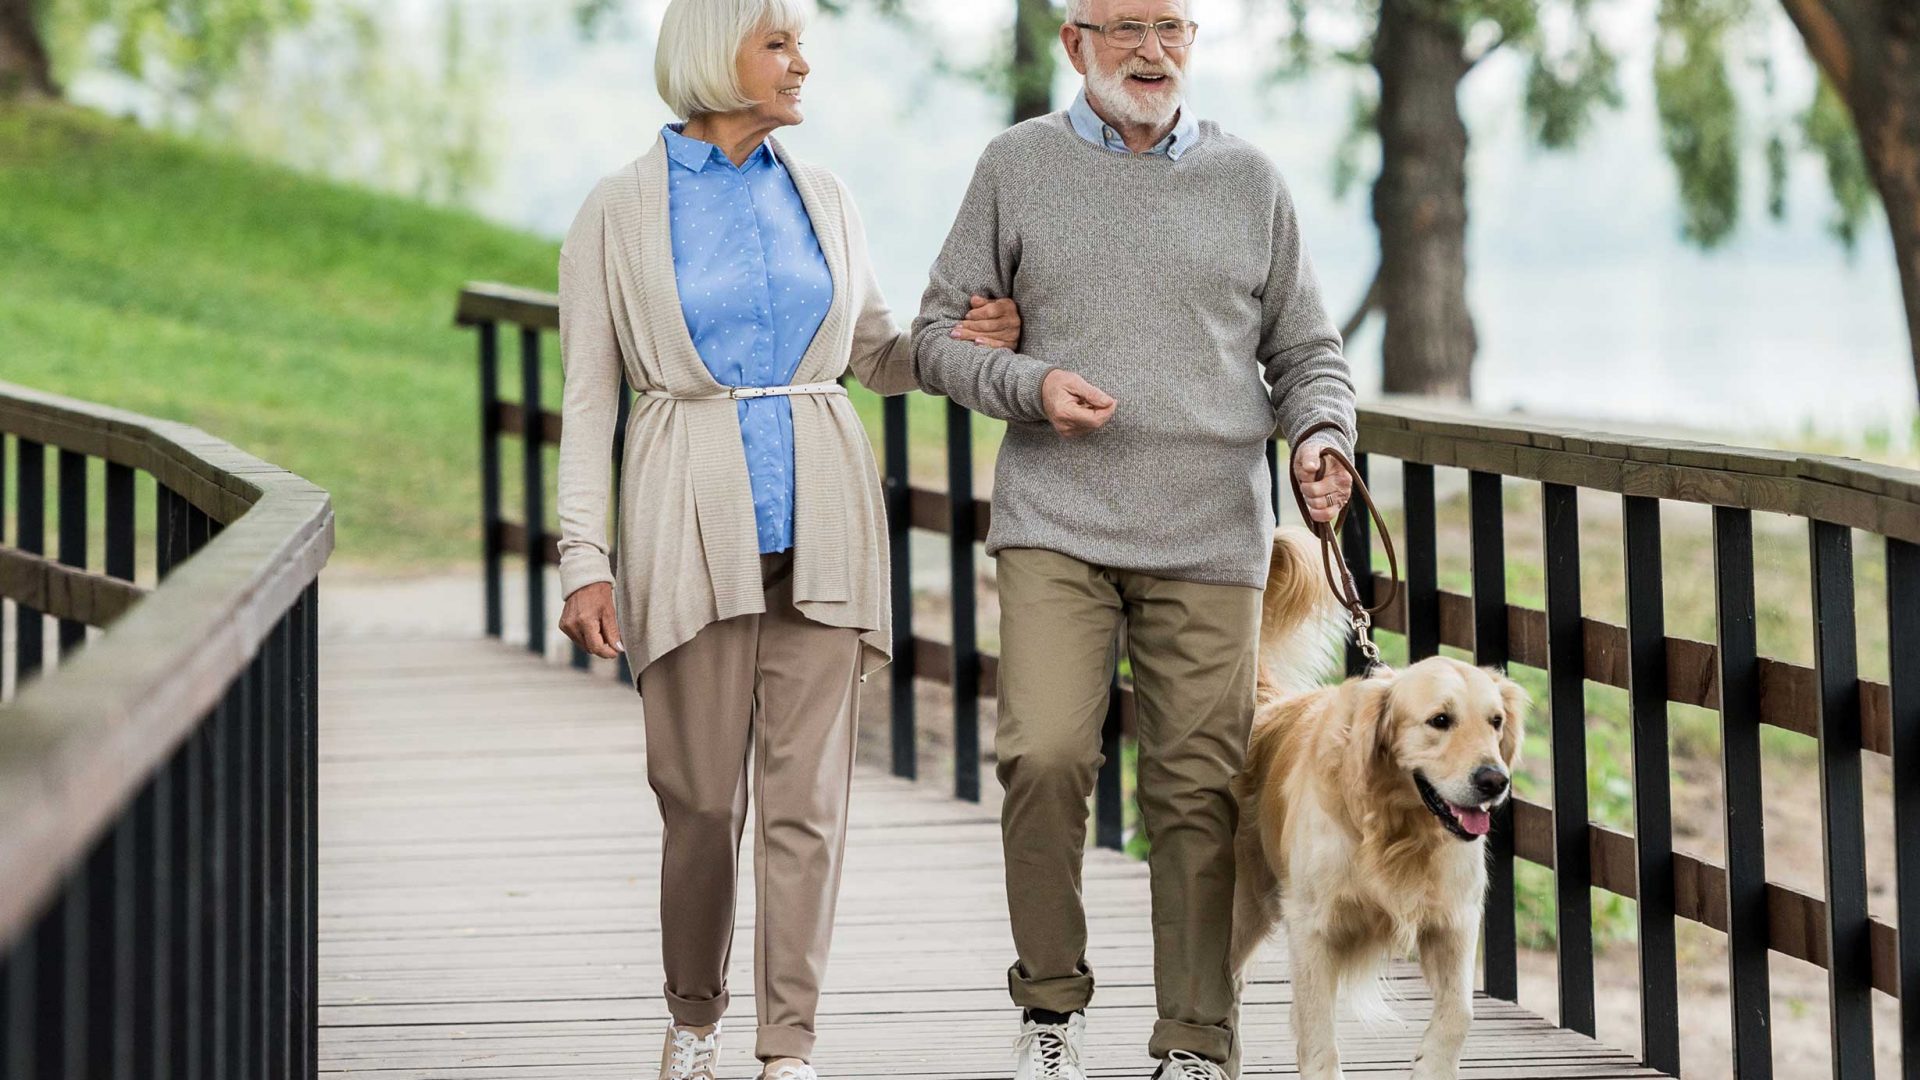 Walking Is An Important Activity For Seniors